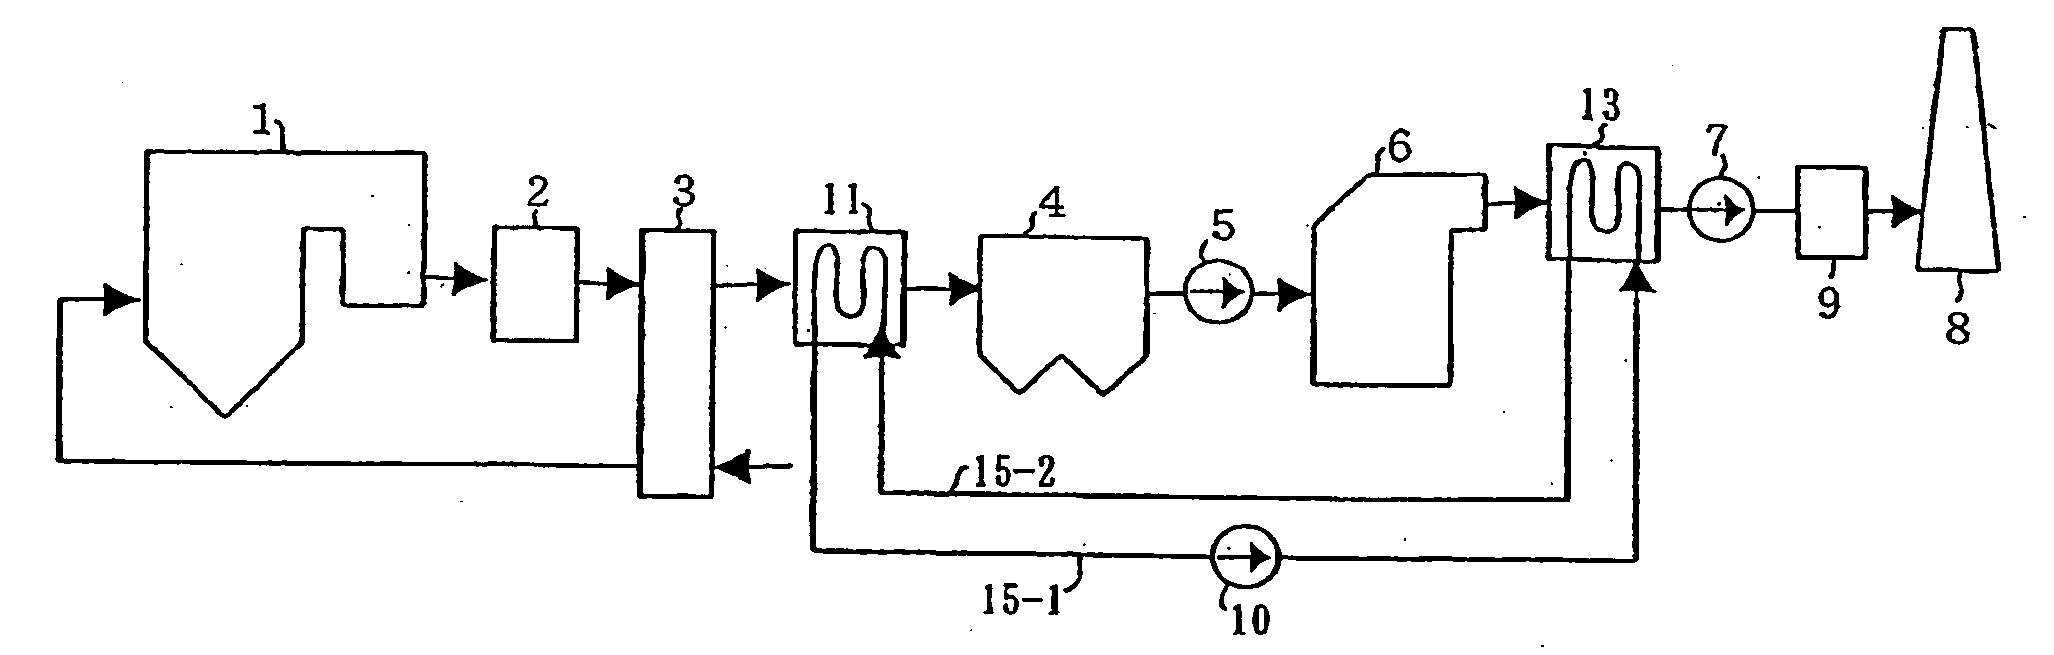 Exhaust smoke-processing system